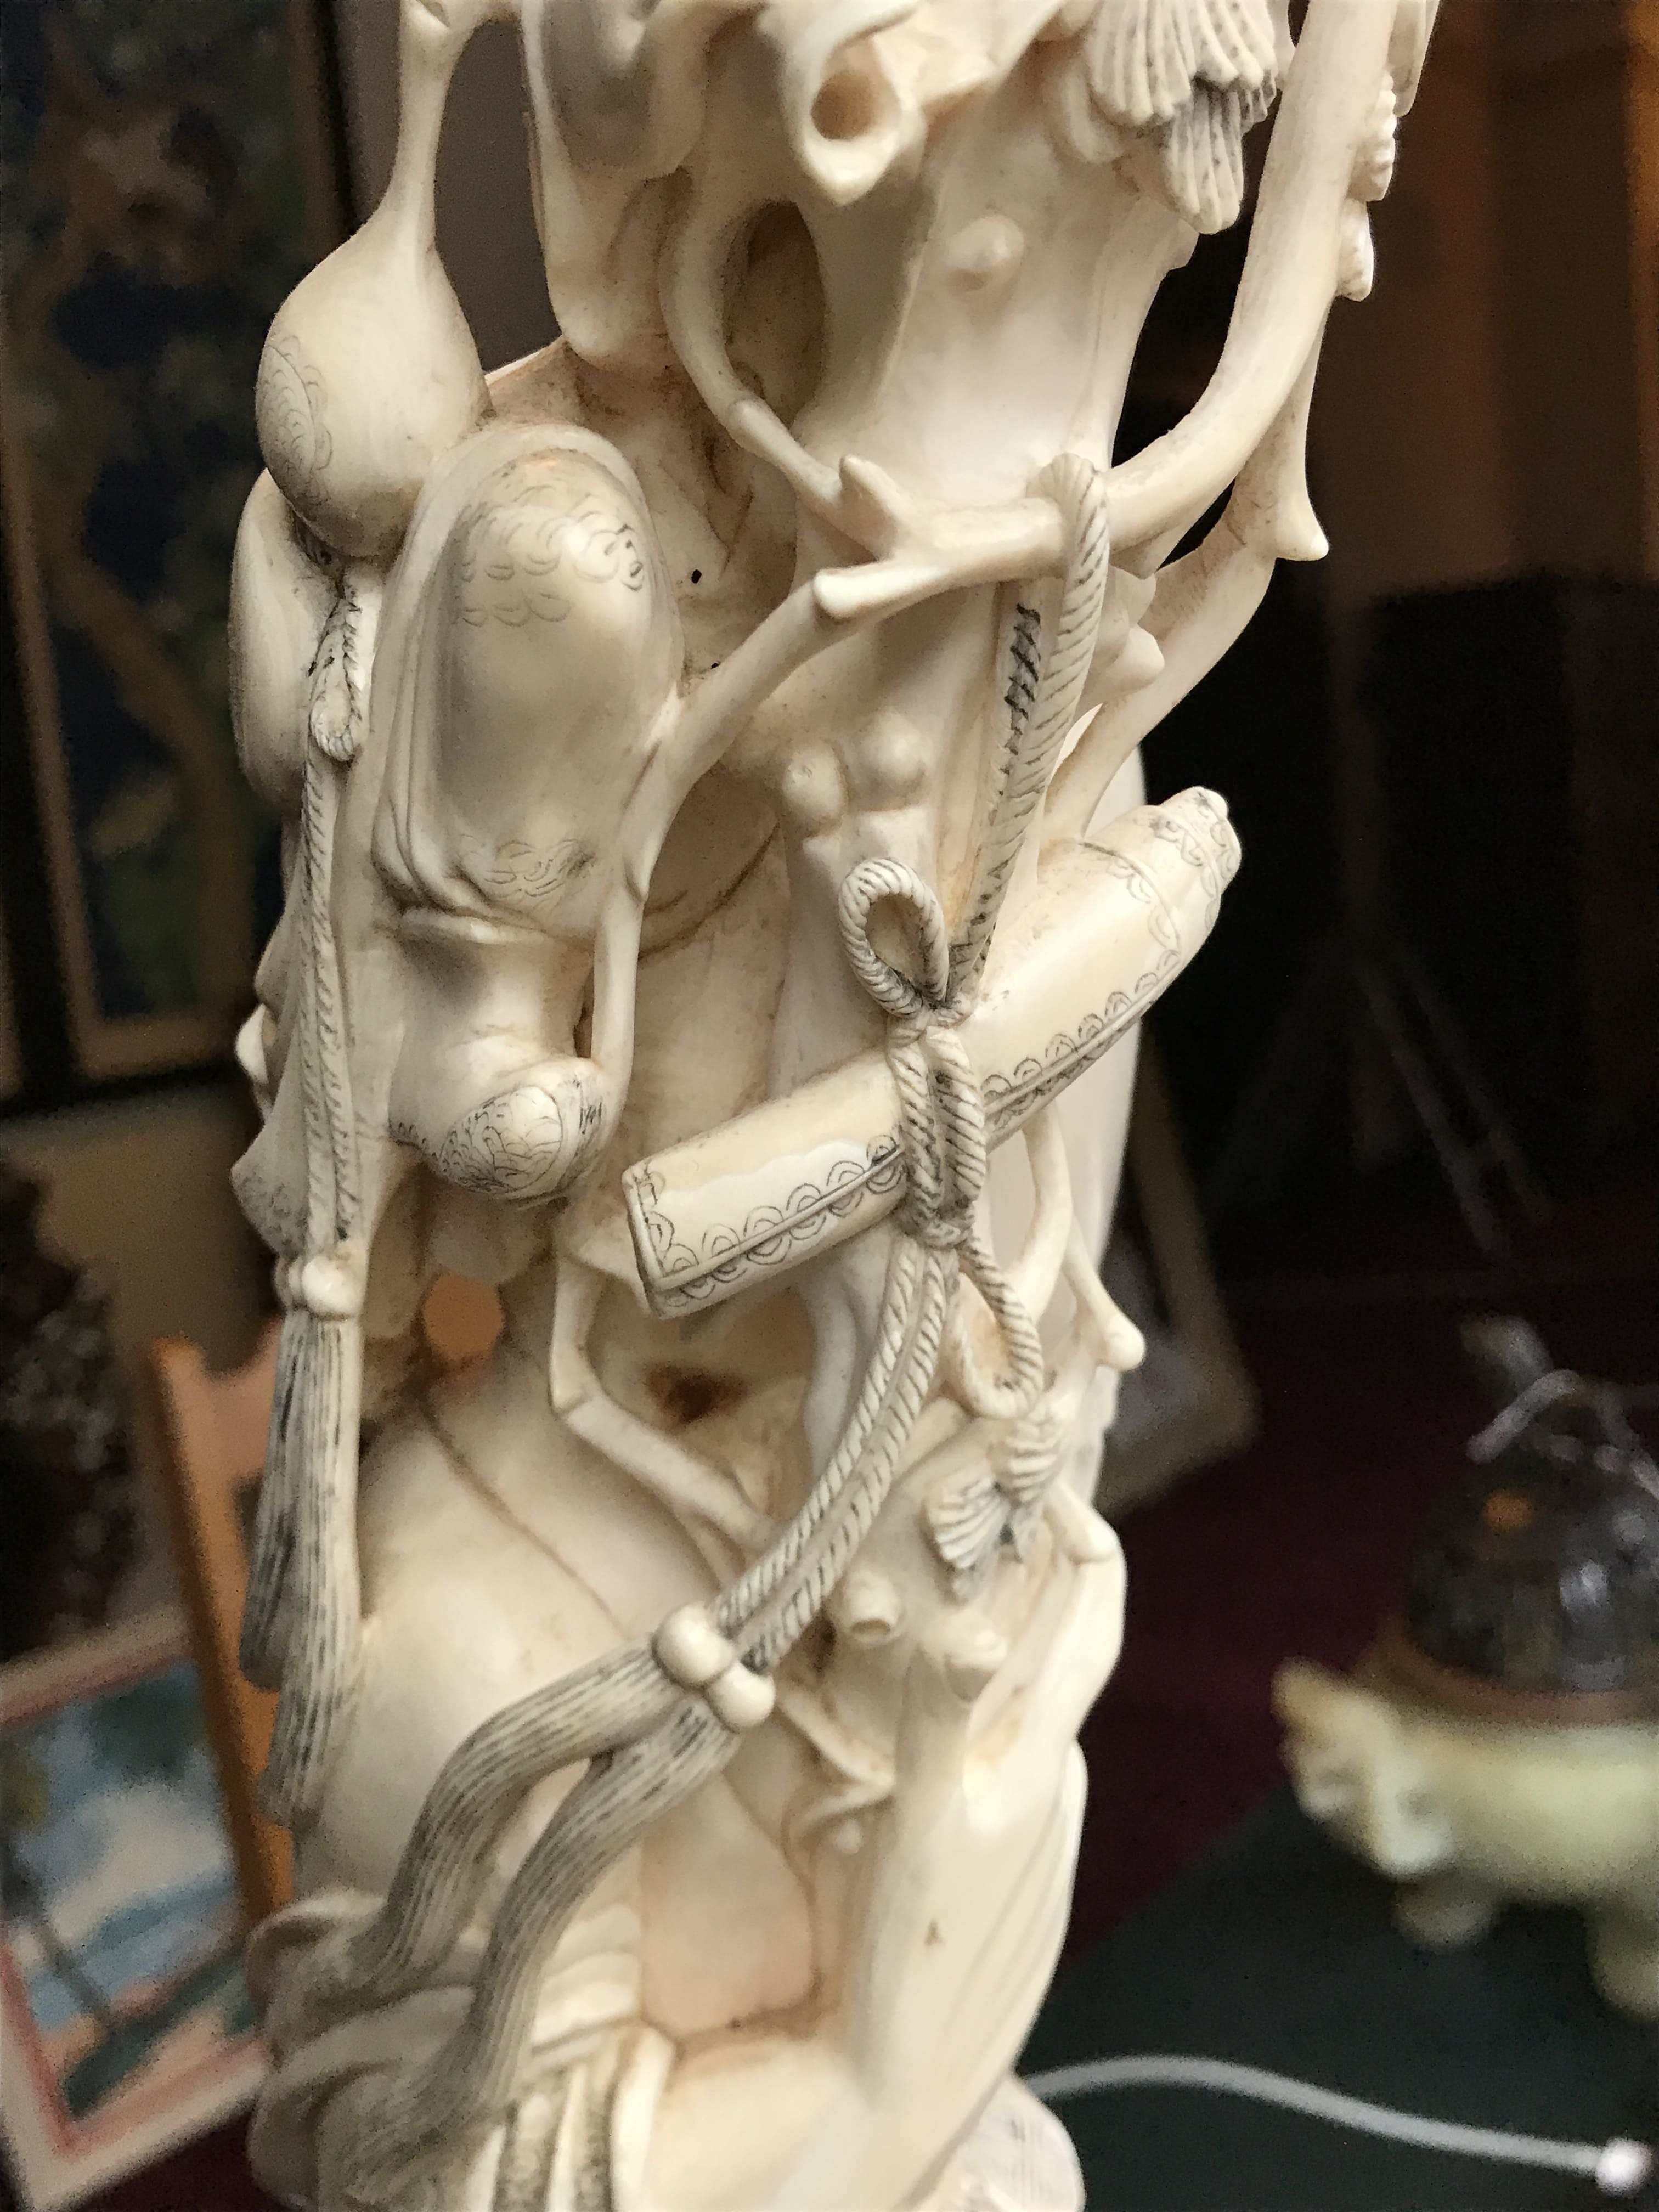 A large Chinese ivory carving of Shou-lao, Qing Dynasty, late 19th/early 20th century